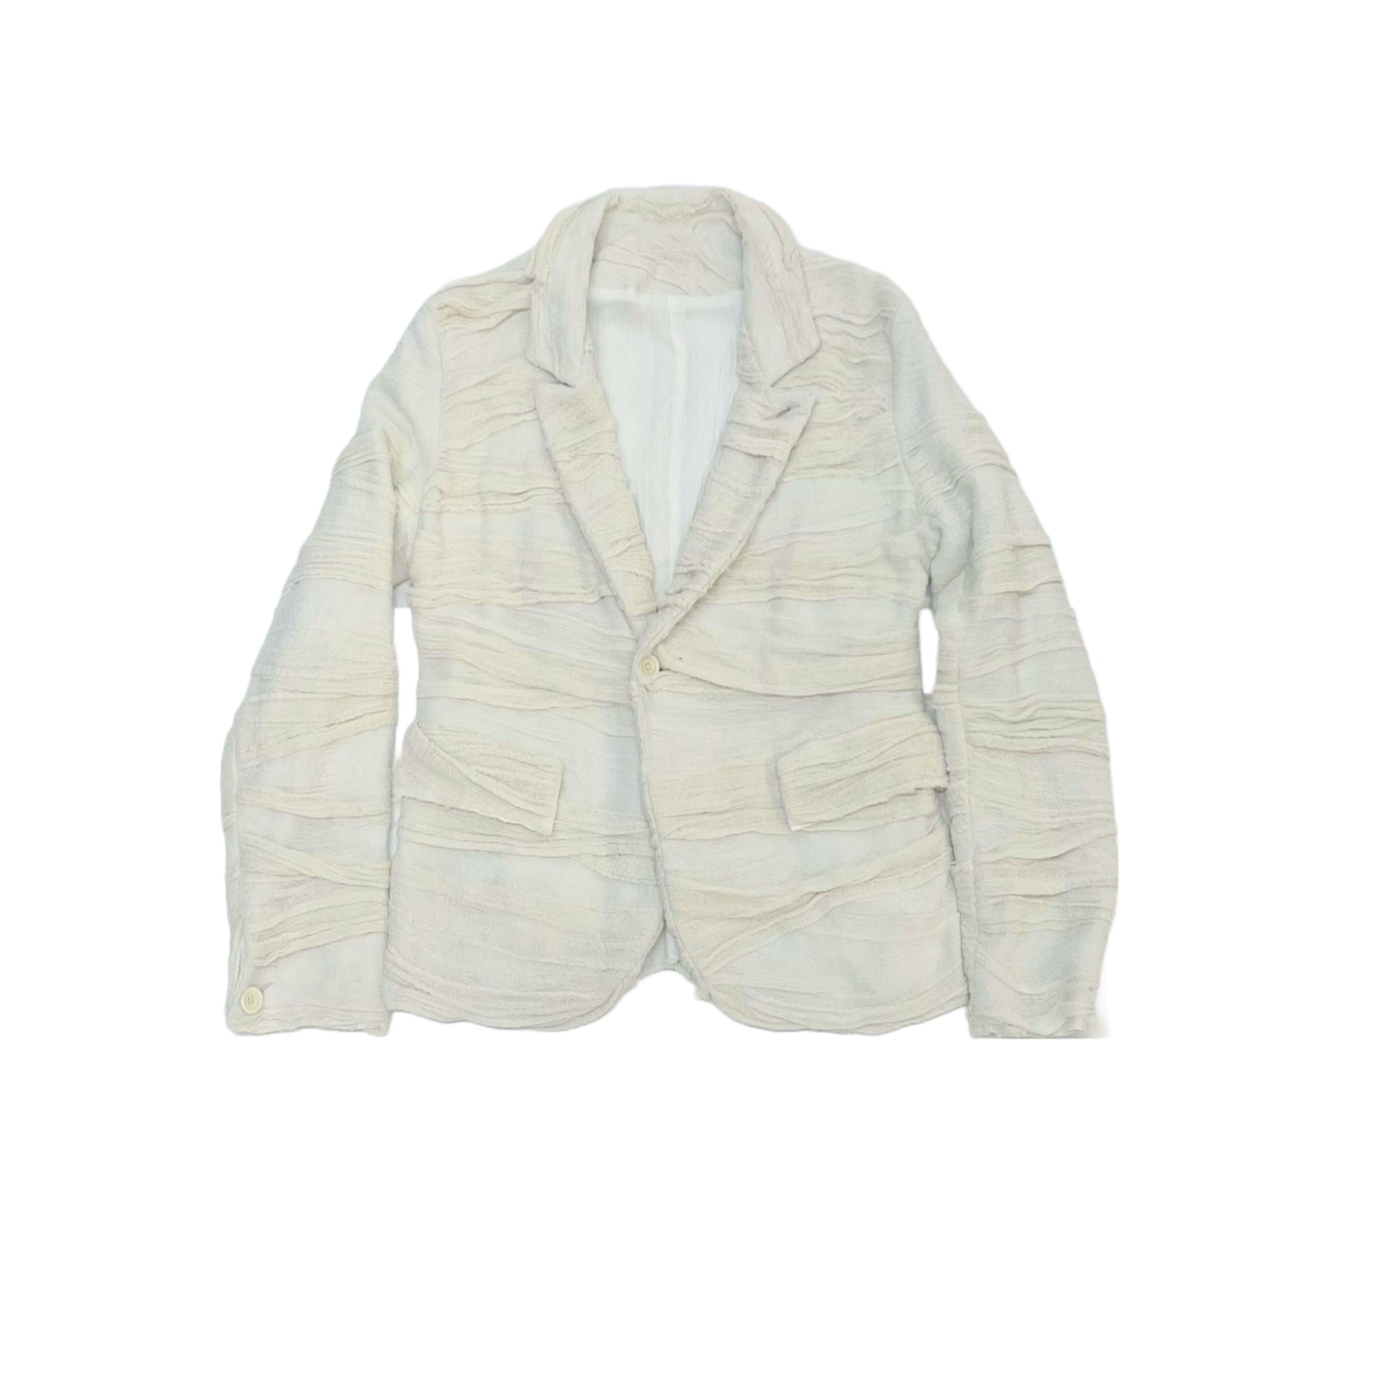 Couture Mummy Wrap Blazer in Off-White Hand Stitched Muslin Appliqué on Antique Linen with Crinkled Cotton Lining